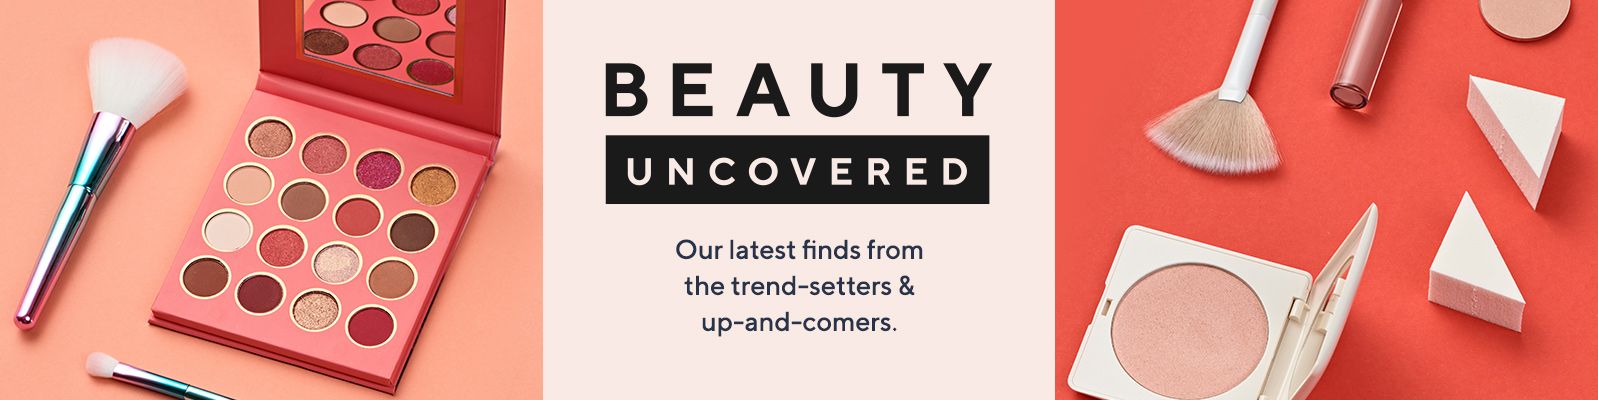 Beauty Uncovered - Our latest finds from the trend-setters & up-and-comers.